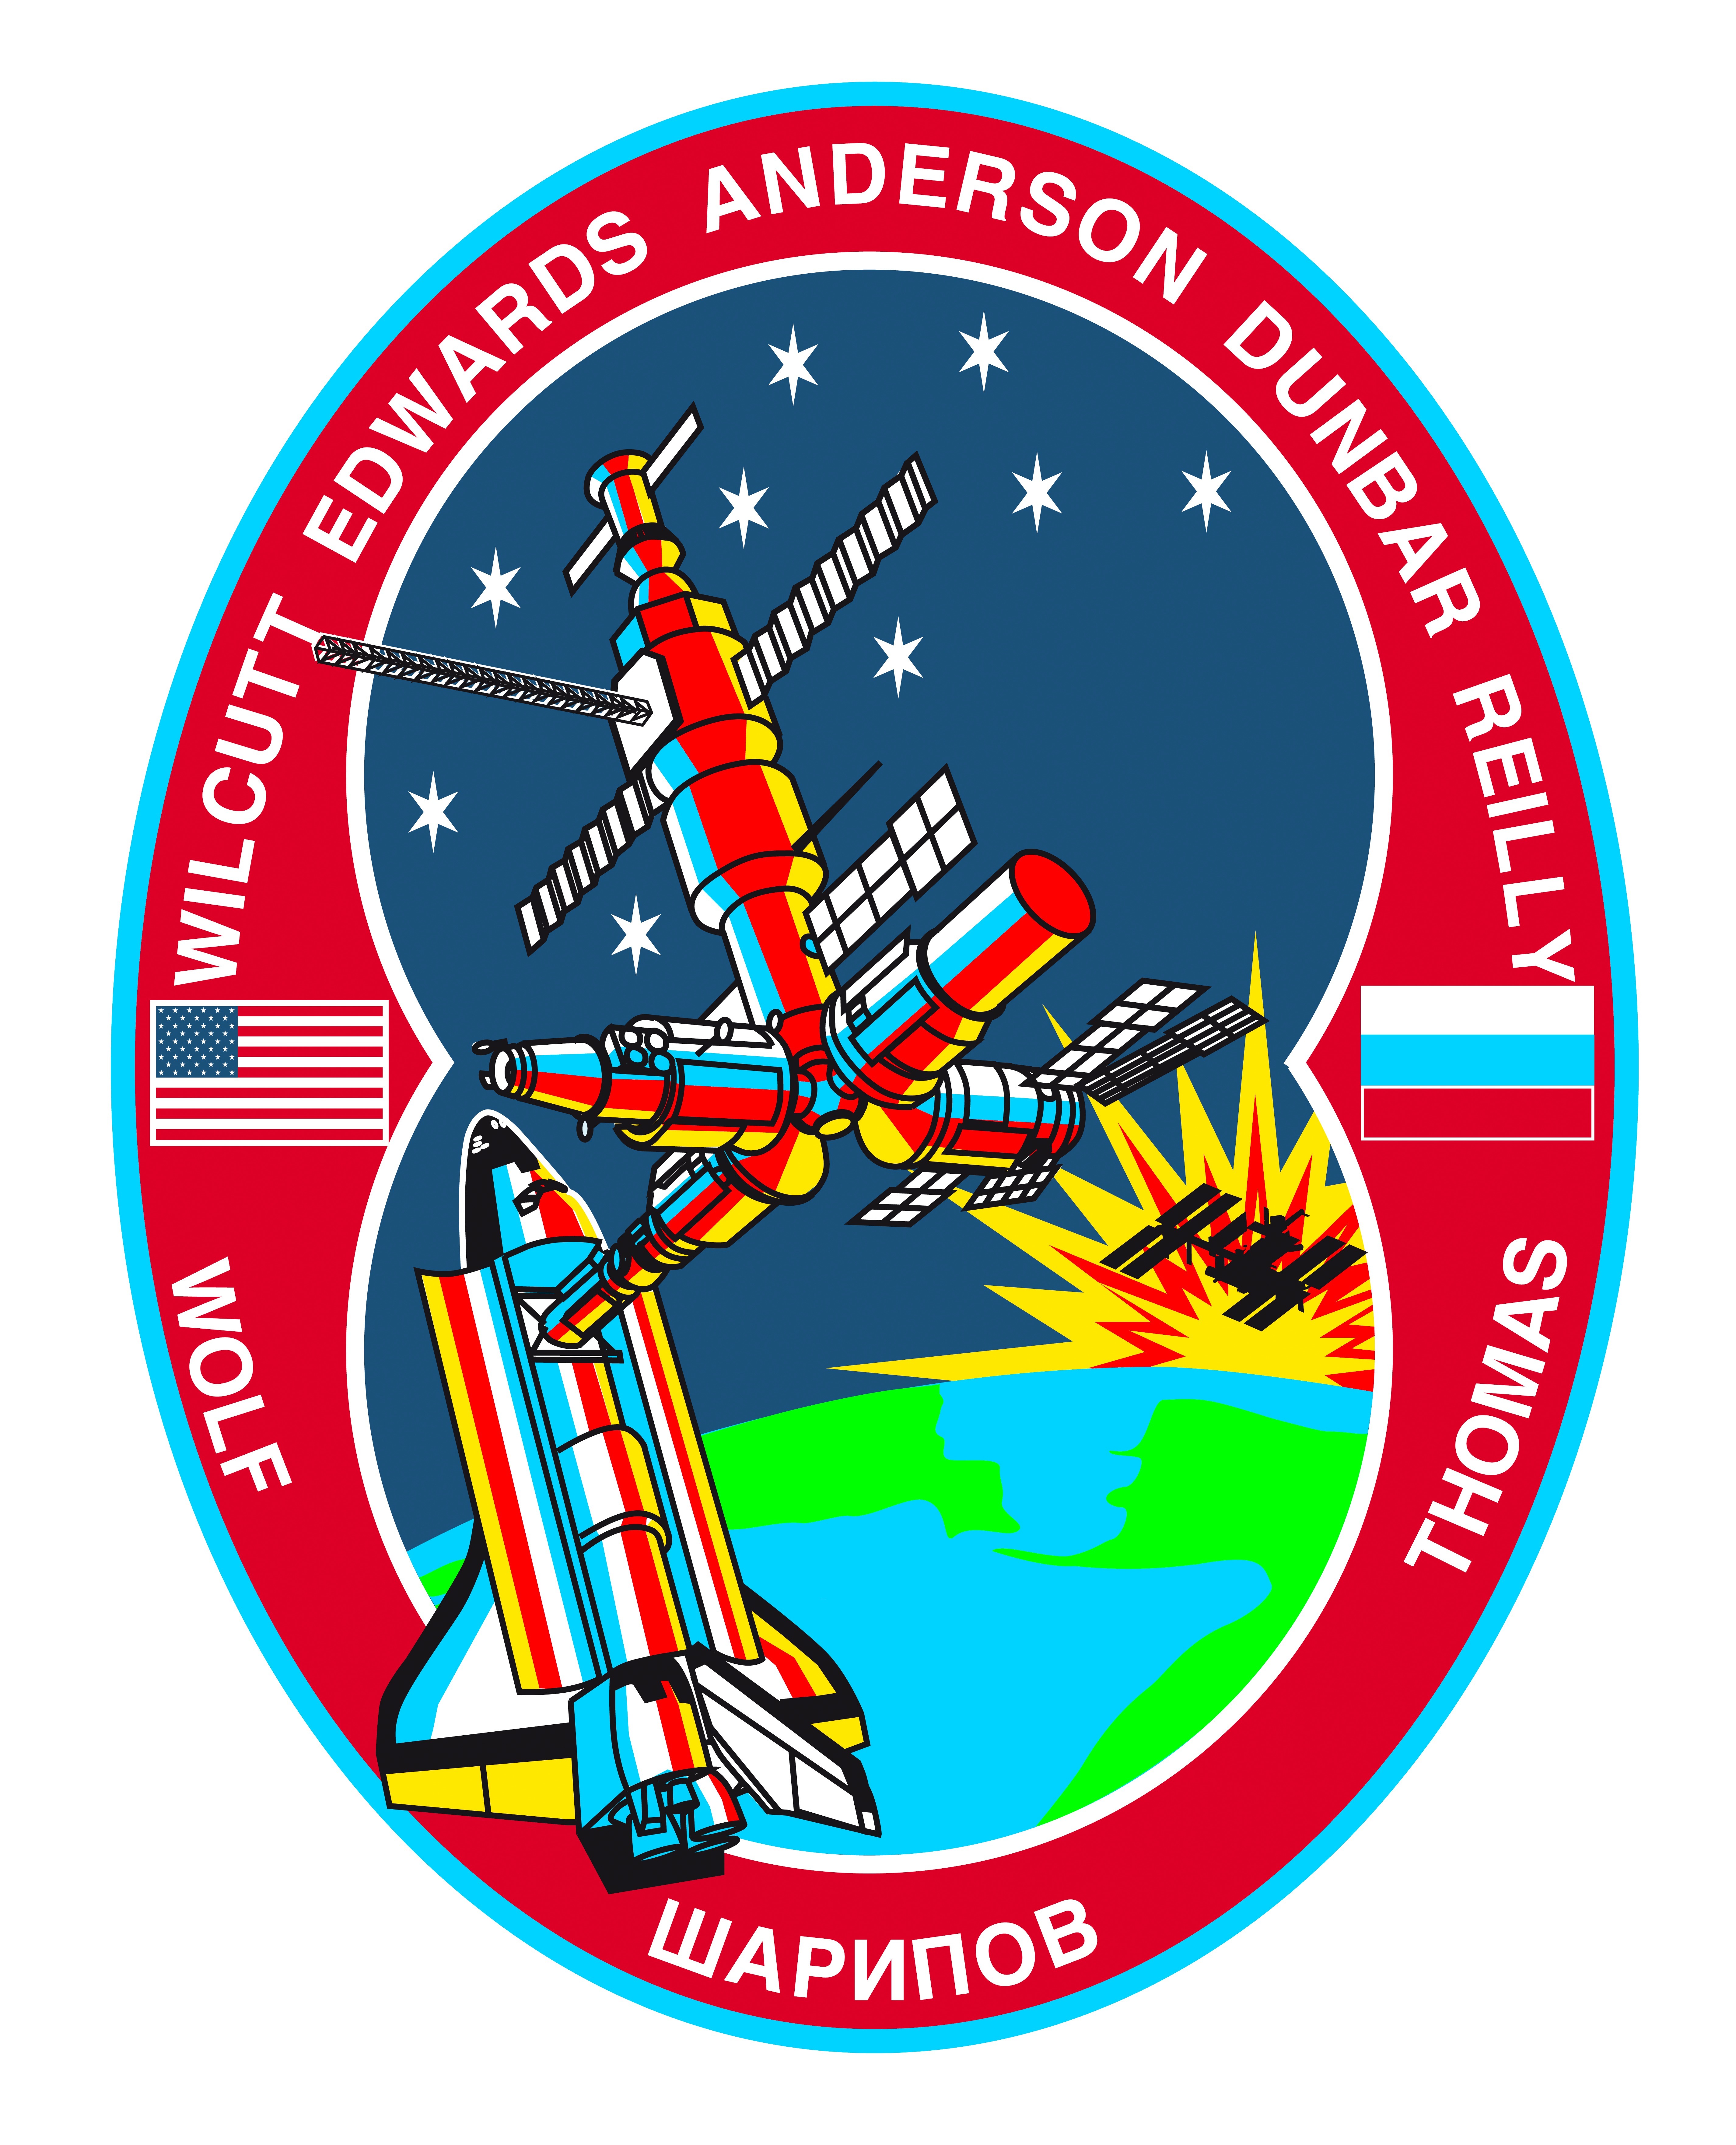 The STS-89 crew patch illustrates the Space Shuttle Endeavour and Russia's Mir Space Station orbiting above the Bering Strait between Siberia and Alaska with a sunrise in the background.